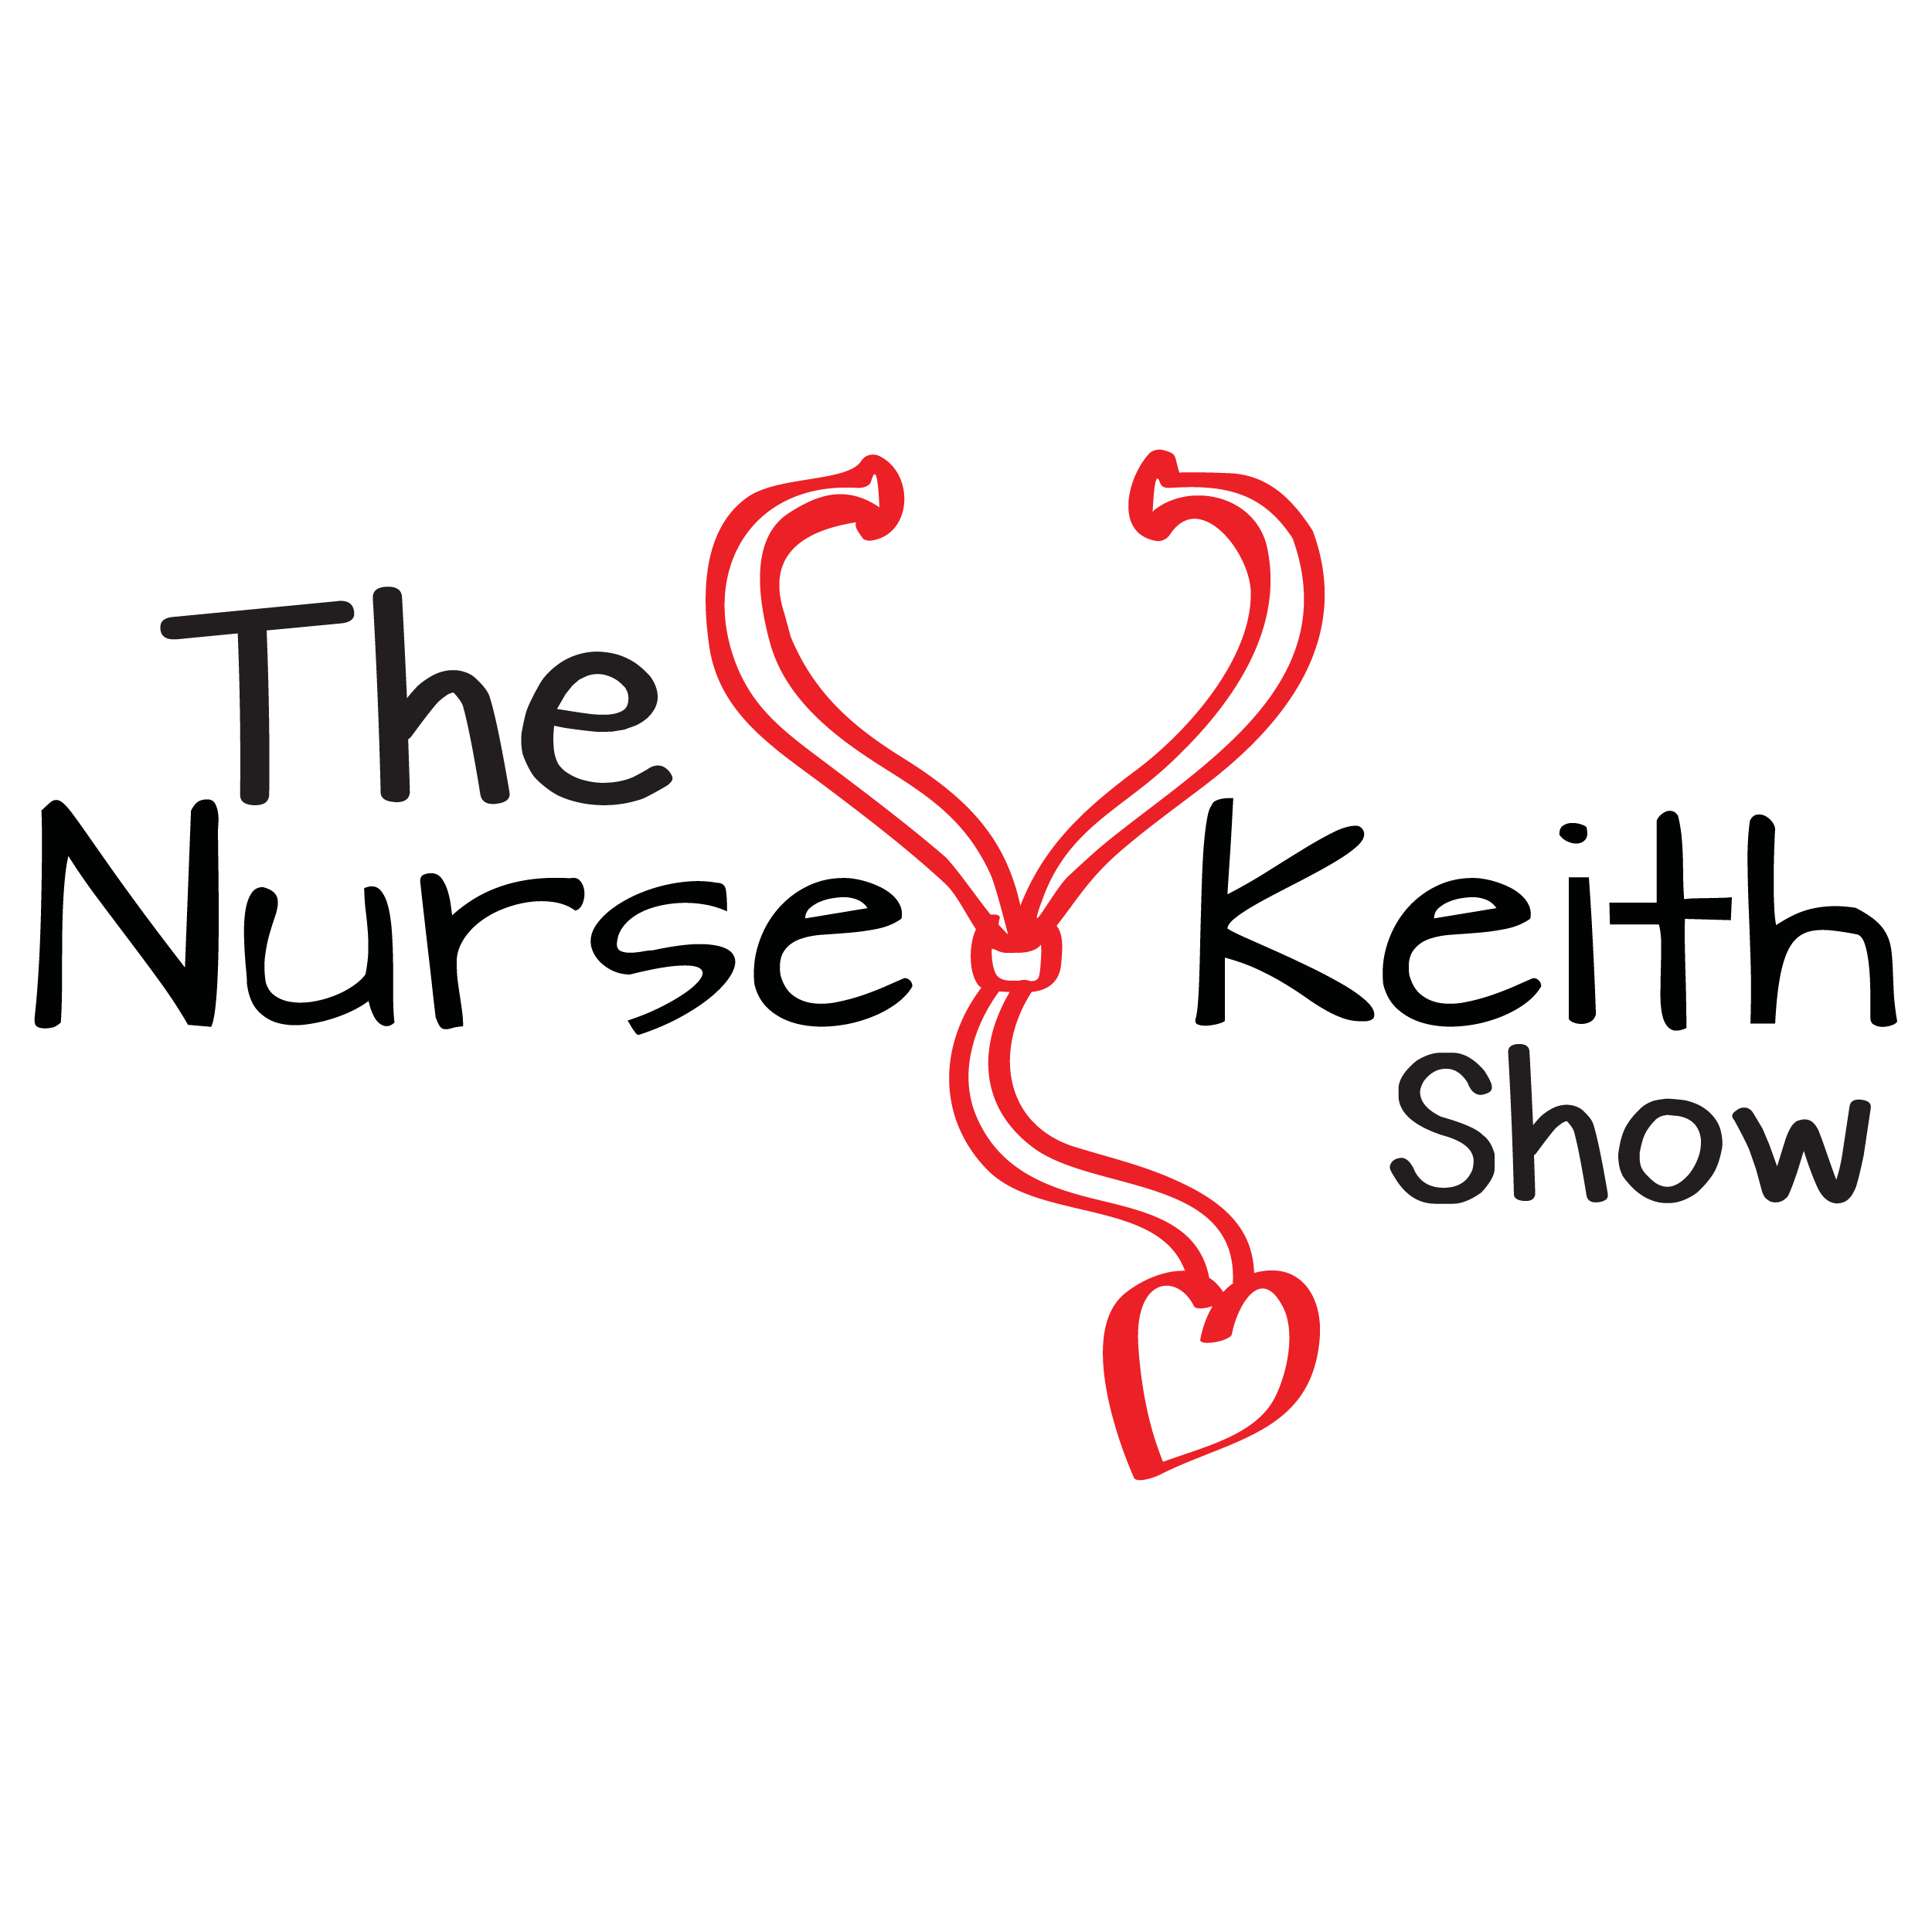 Nurses, Are You On Fire To Start A Business? The Nurse Keith Show, EPS 64